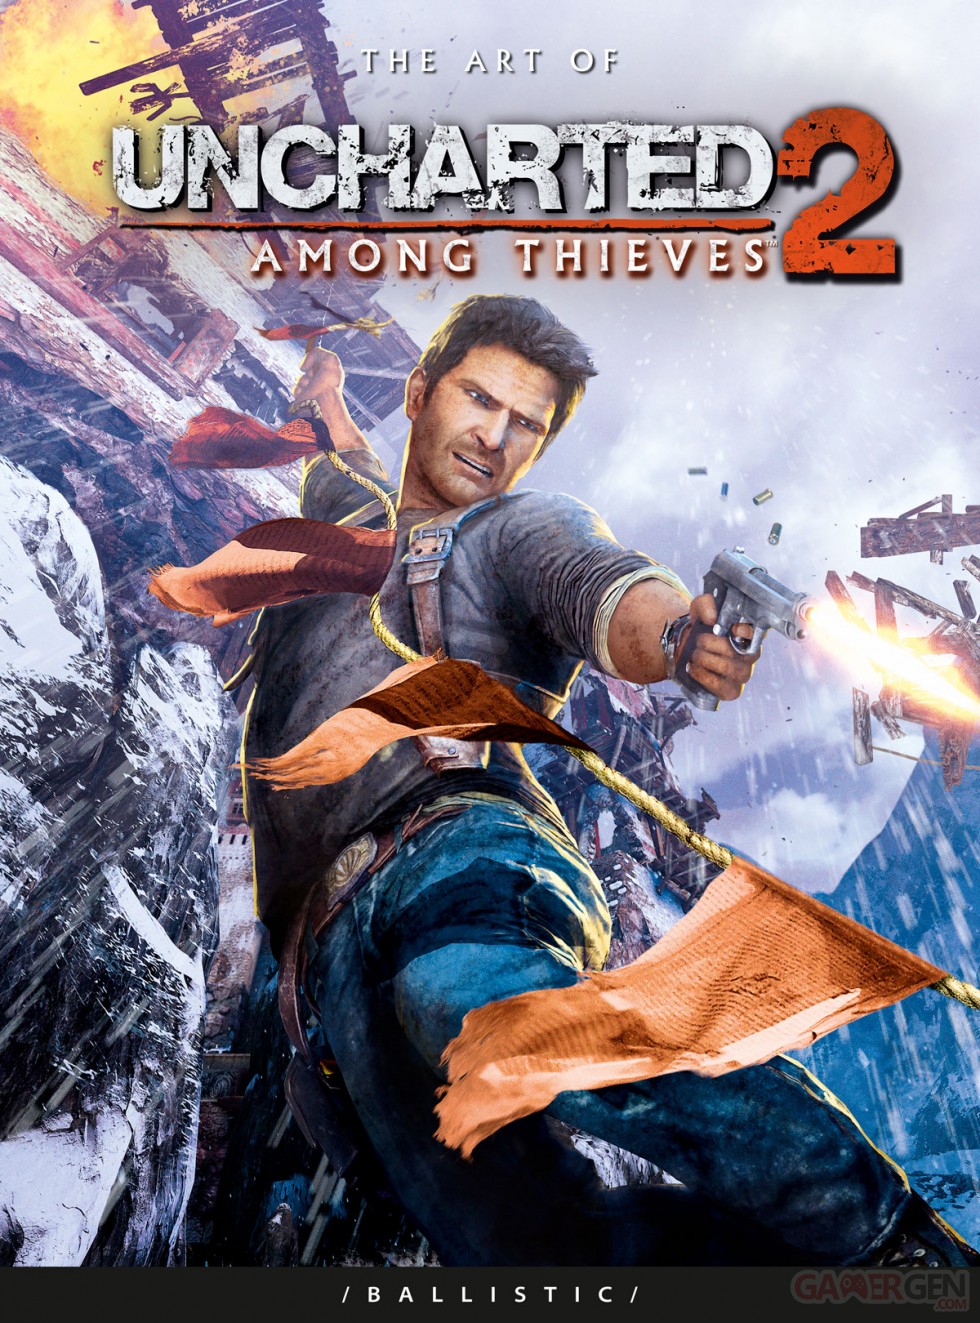 Uncharted-2-Among-Thieves-artbook-1